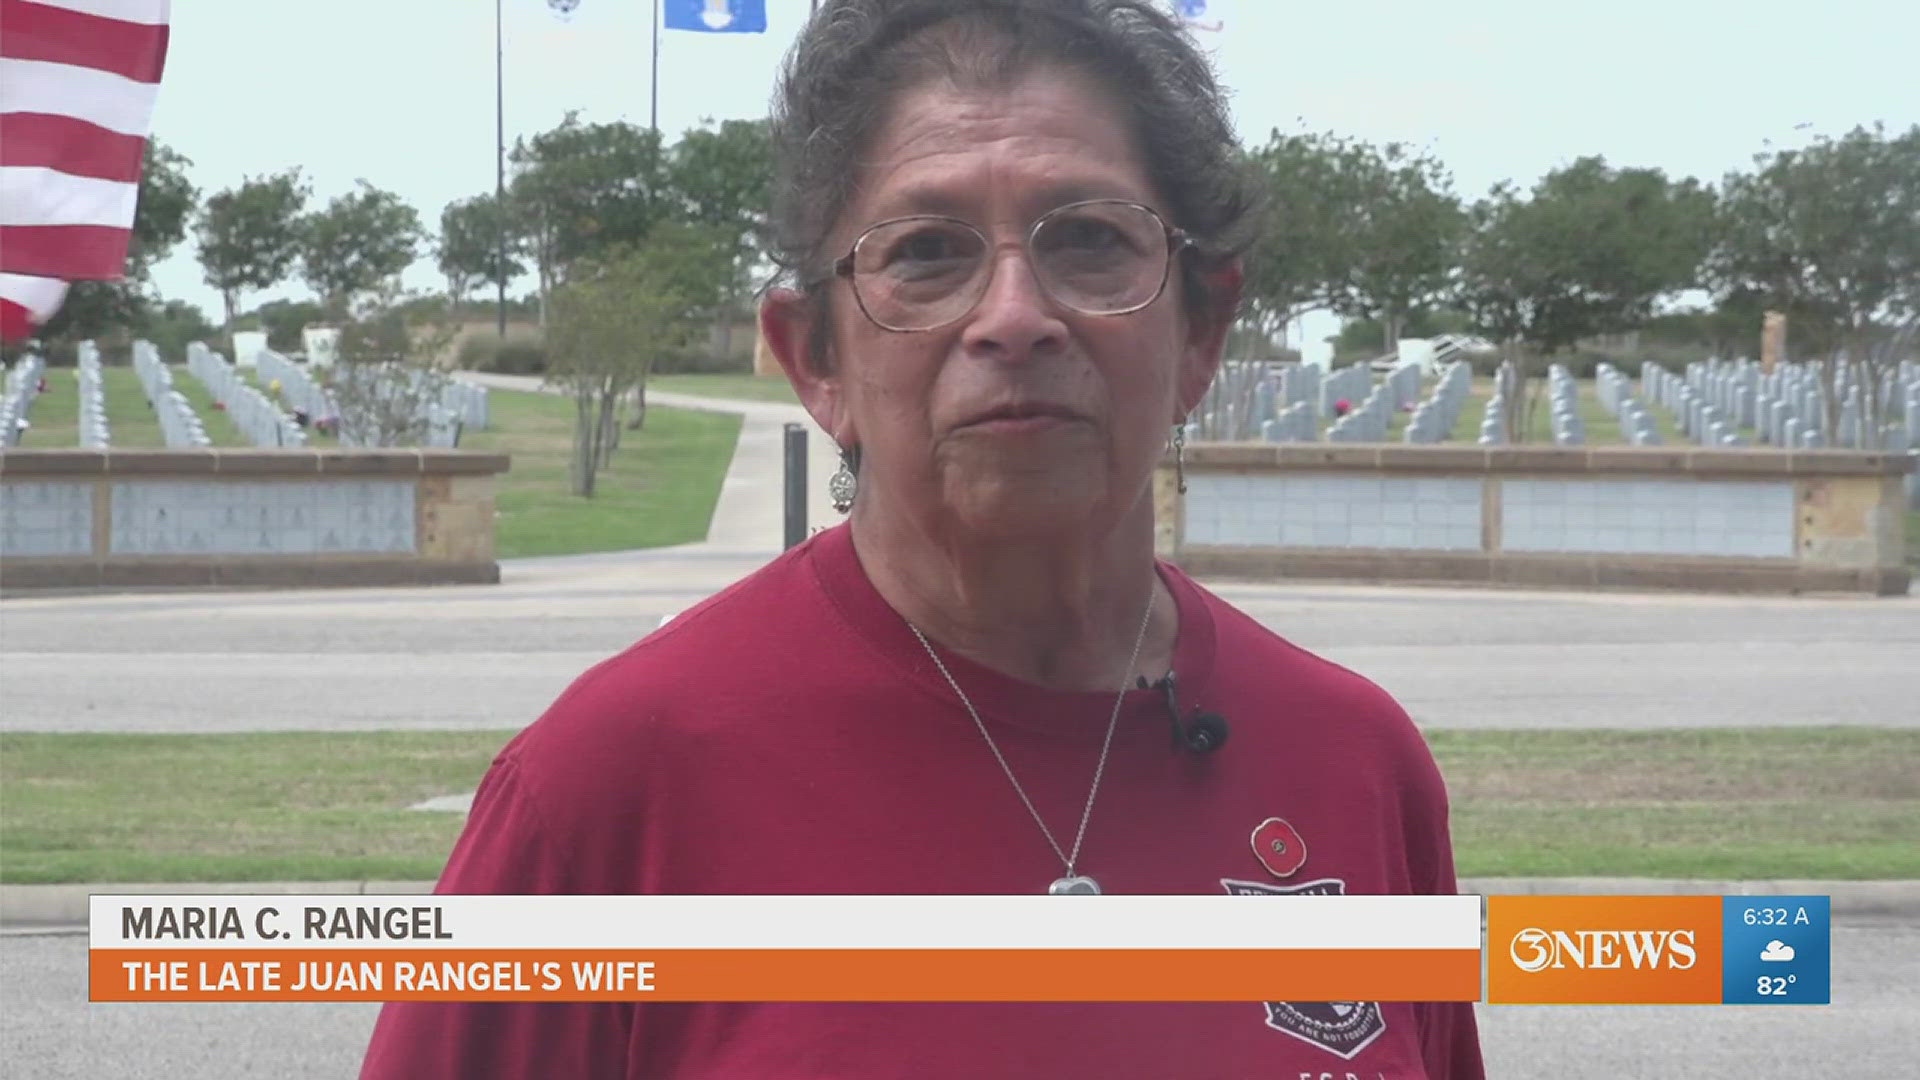 Widower shares her story of late husband's experience during the Vietnam War. We also hear from the leader of Gold Star Families on what Memorial Day means.